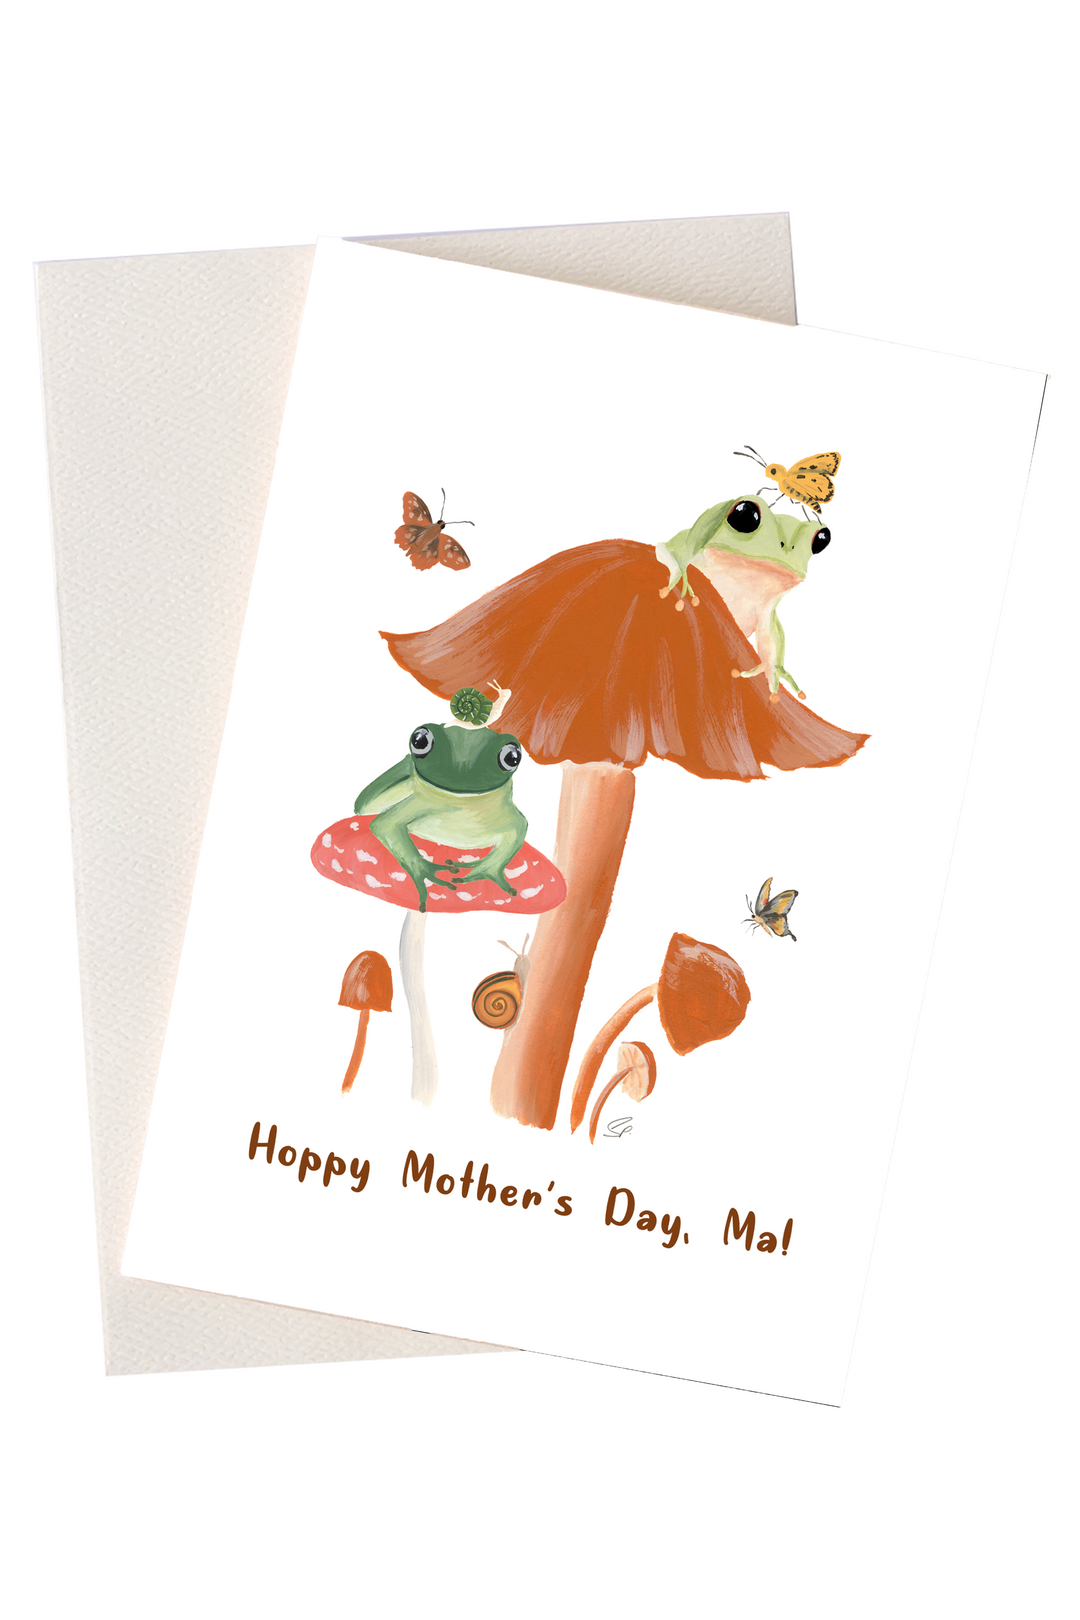 Hoppy Mother's Day Greeting Card